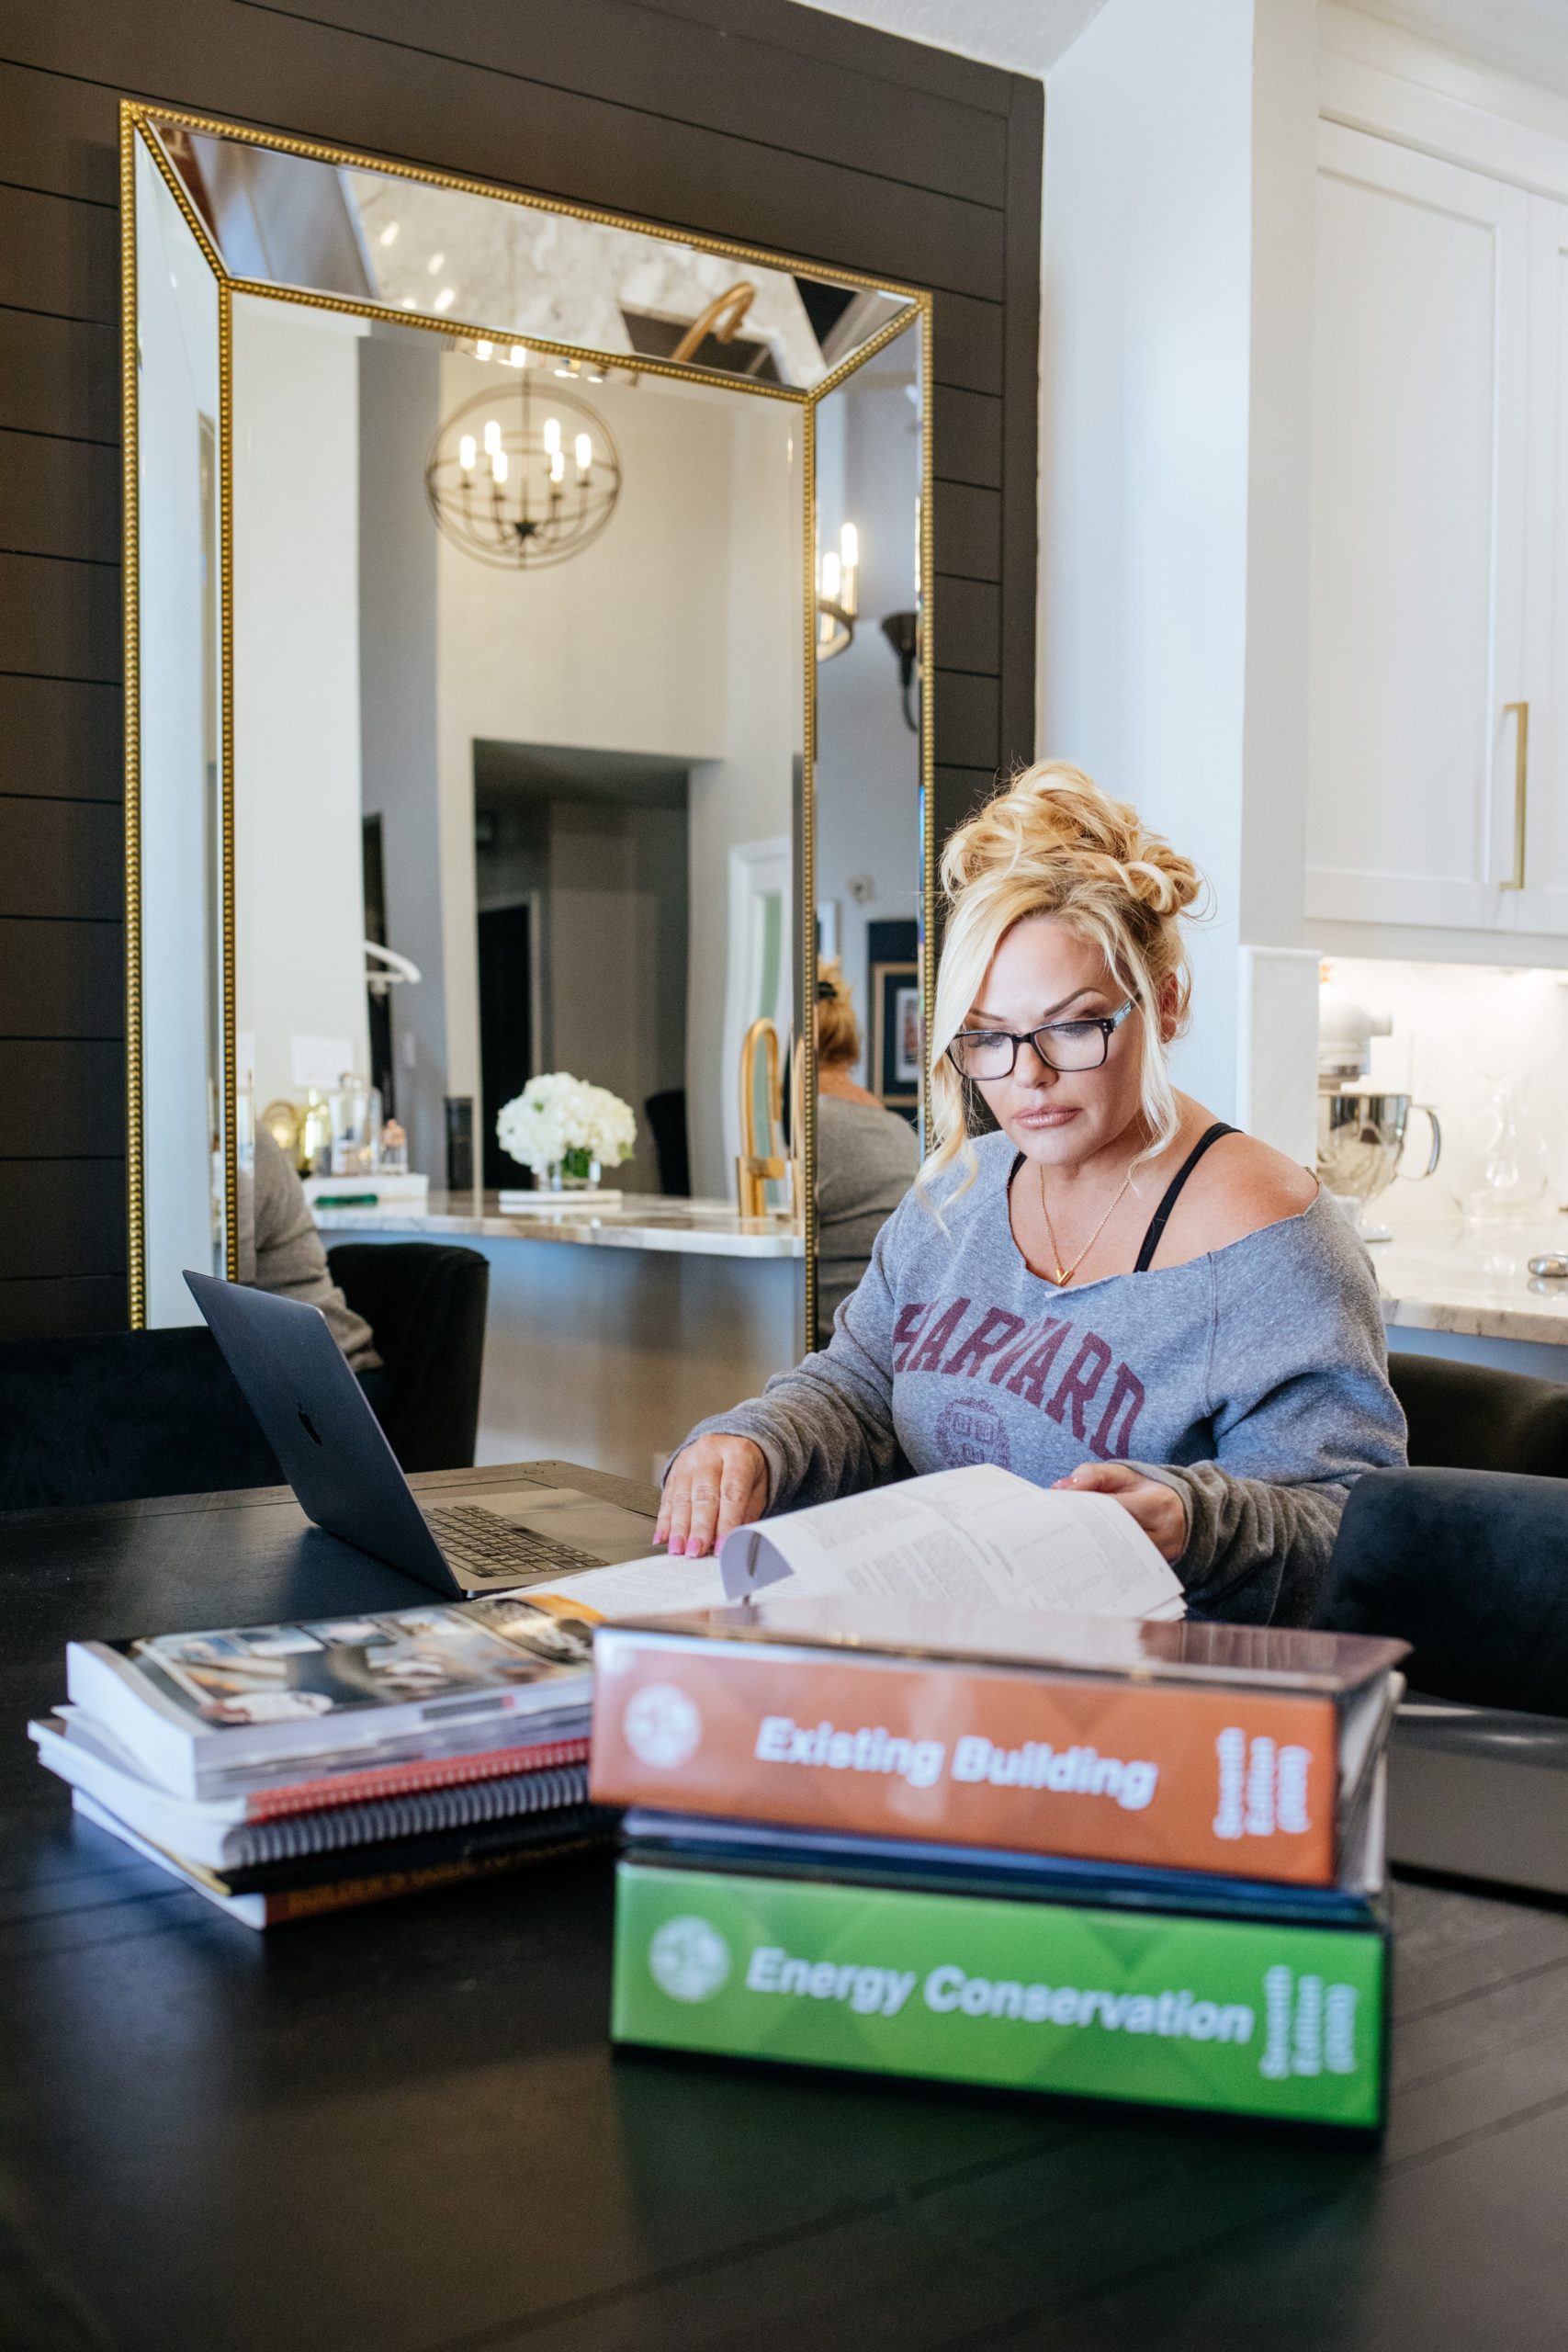 Florida Real Estate Investor and Interior Designer Christine Smith. Click here to get inspired by this firecracker's branding photoshoot!